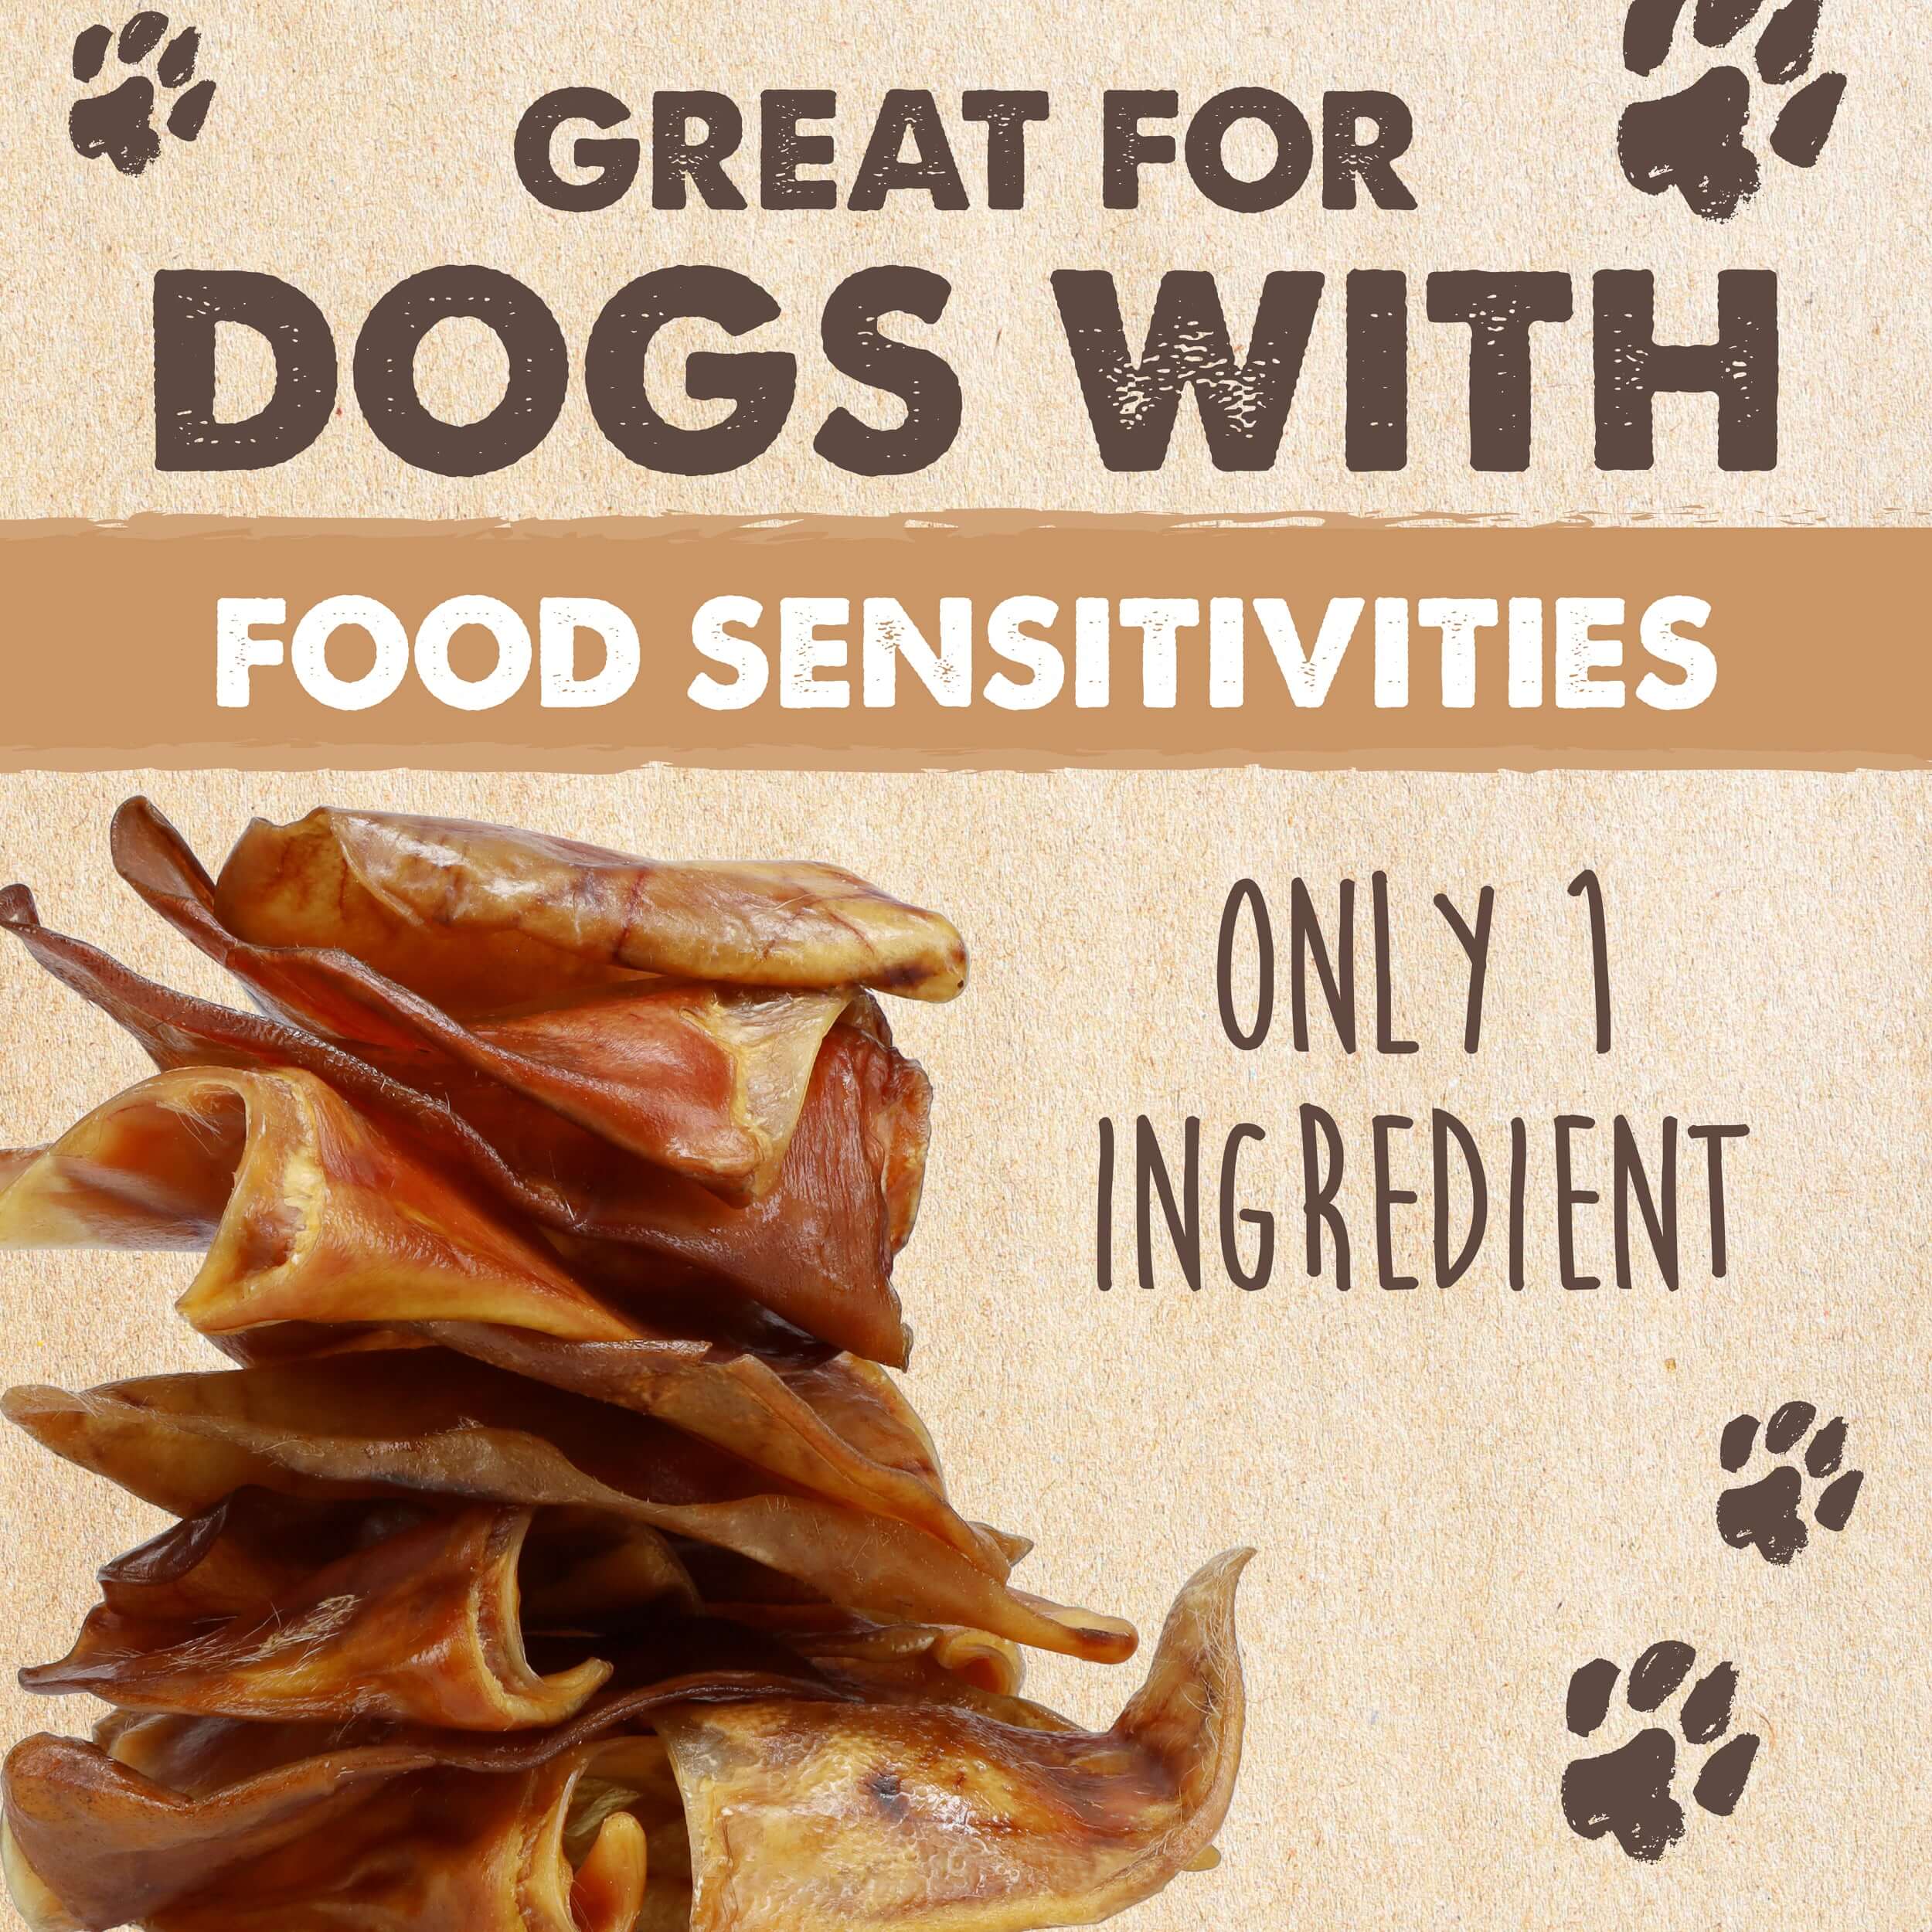 Pig Ear Chews for Dogs (12 Pack)